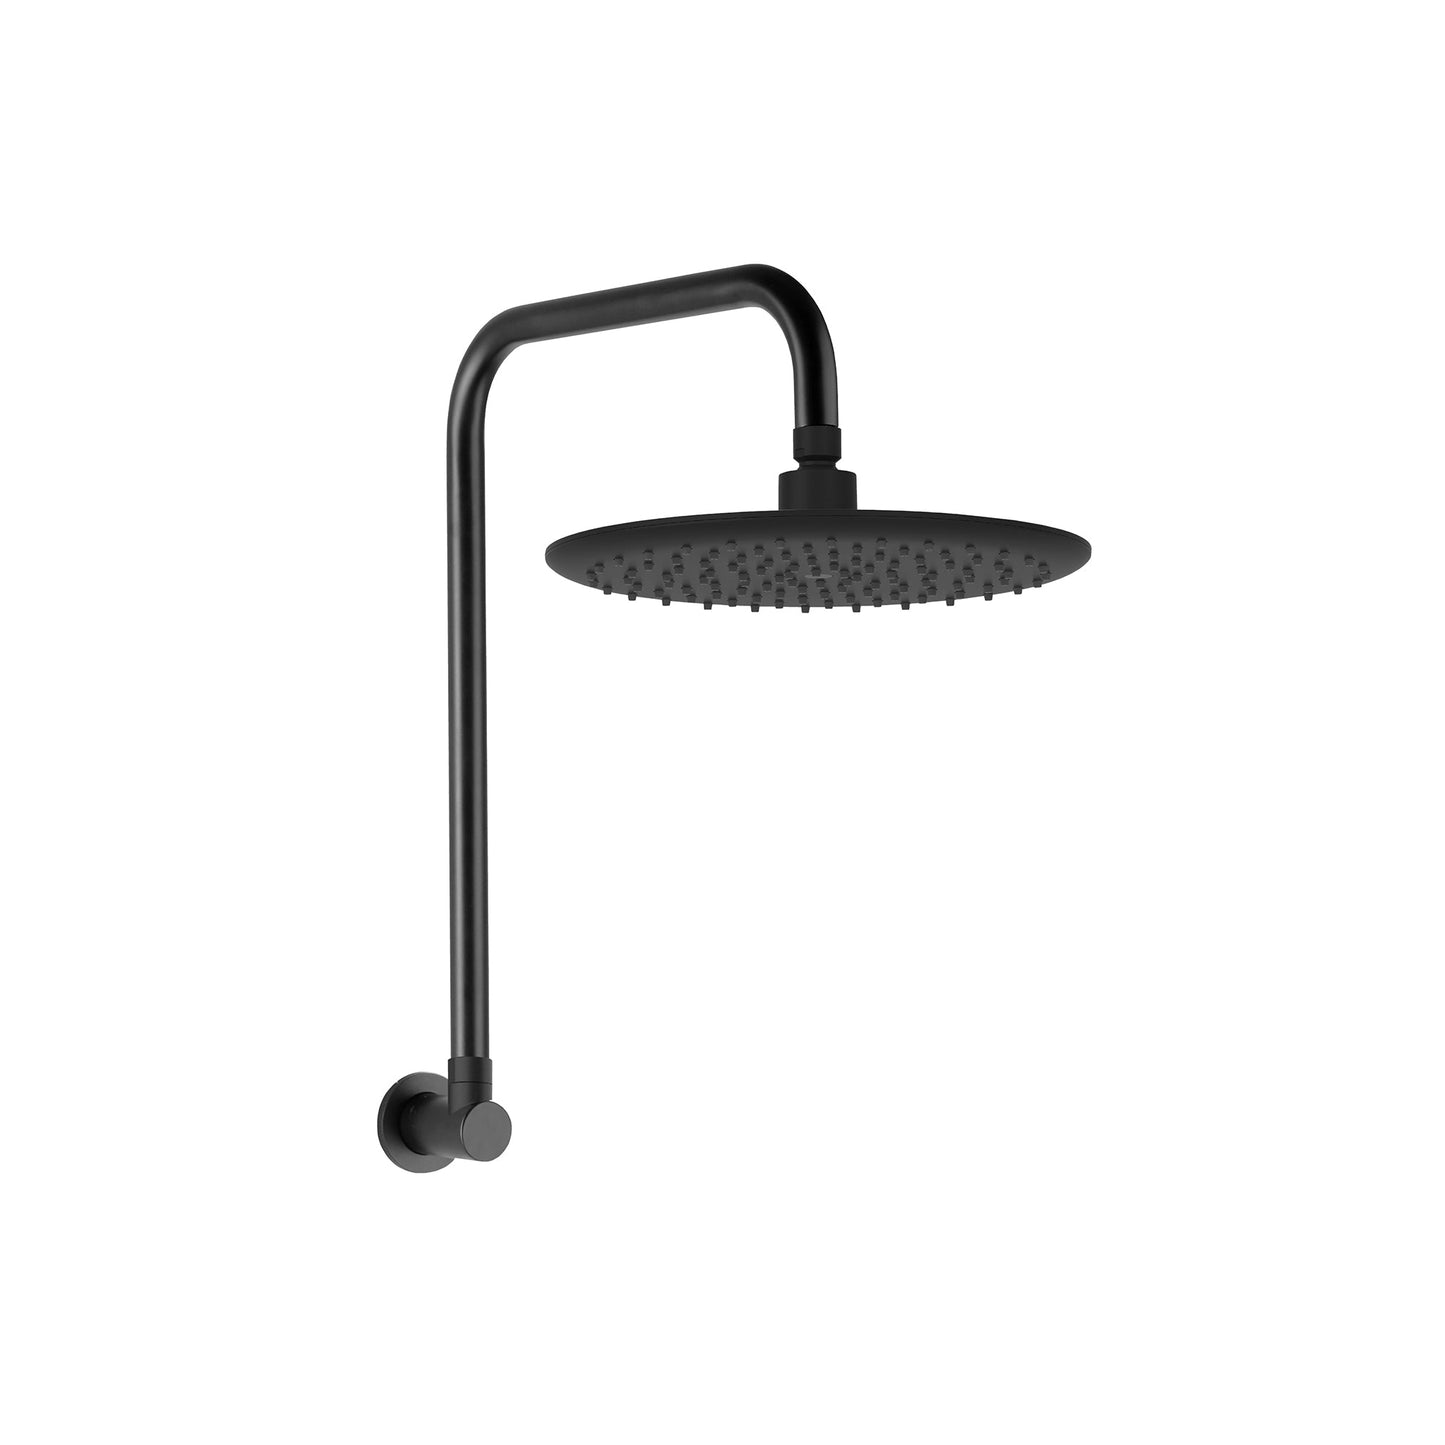 Linkware T7803CP- Gabe Gooseneck Shower Head with Arm - 2 Magpies - Kitchen and Bathroom Sink and Tap Suppliers